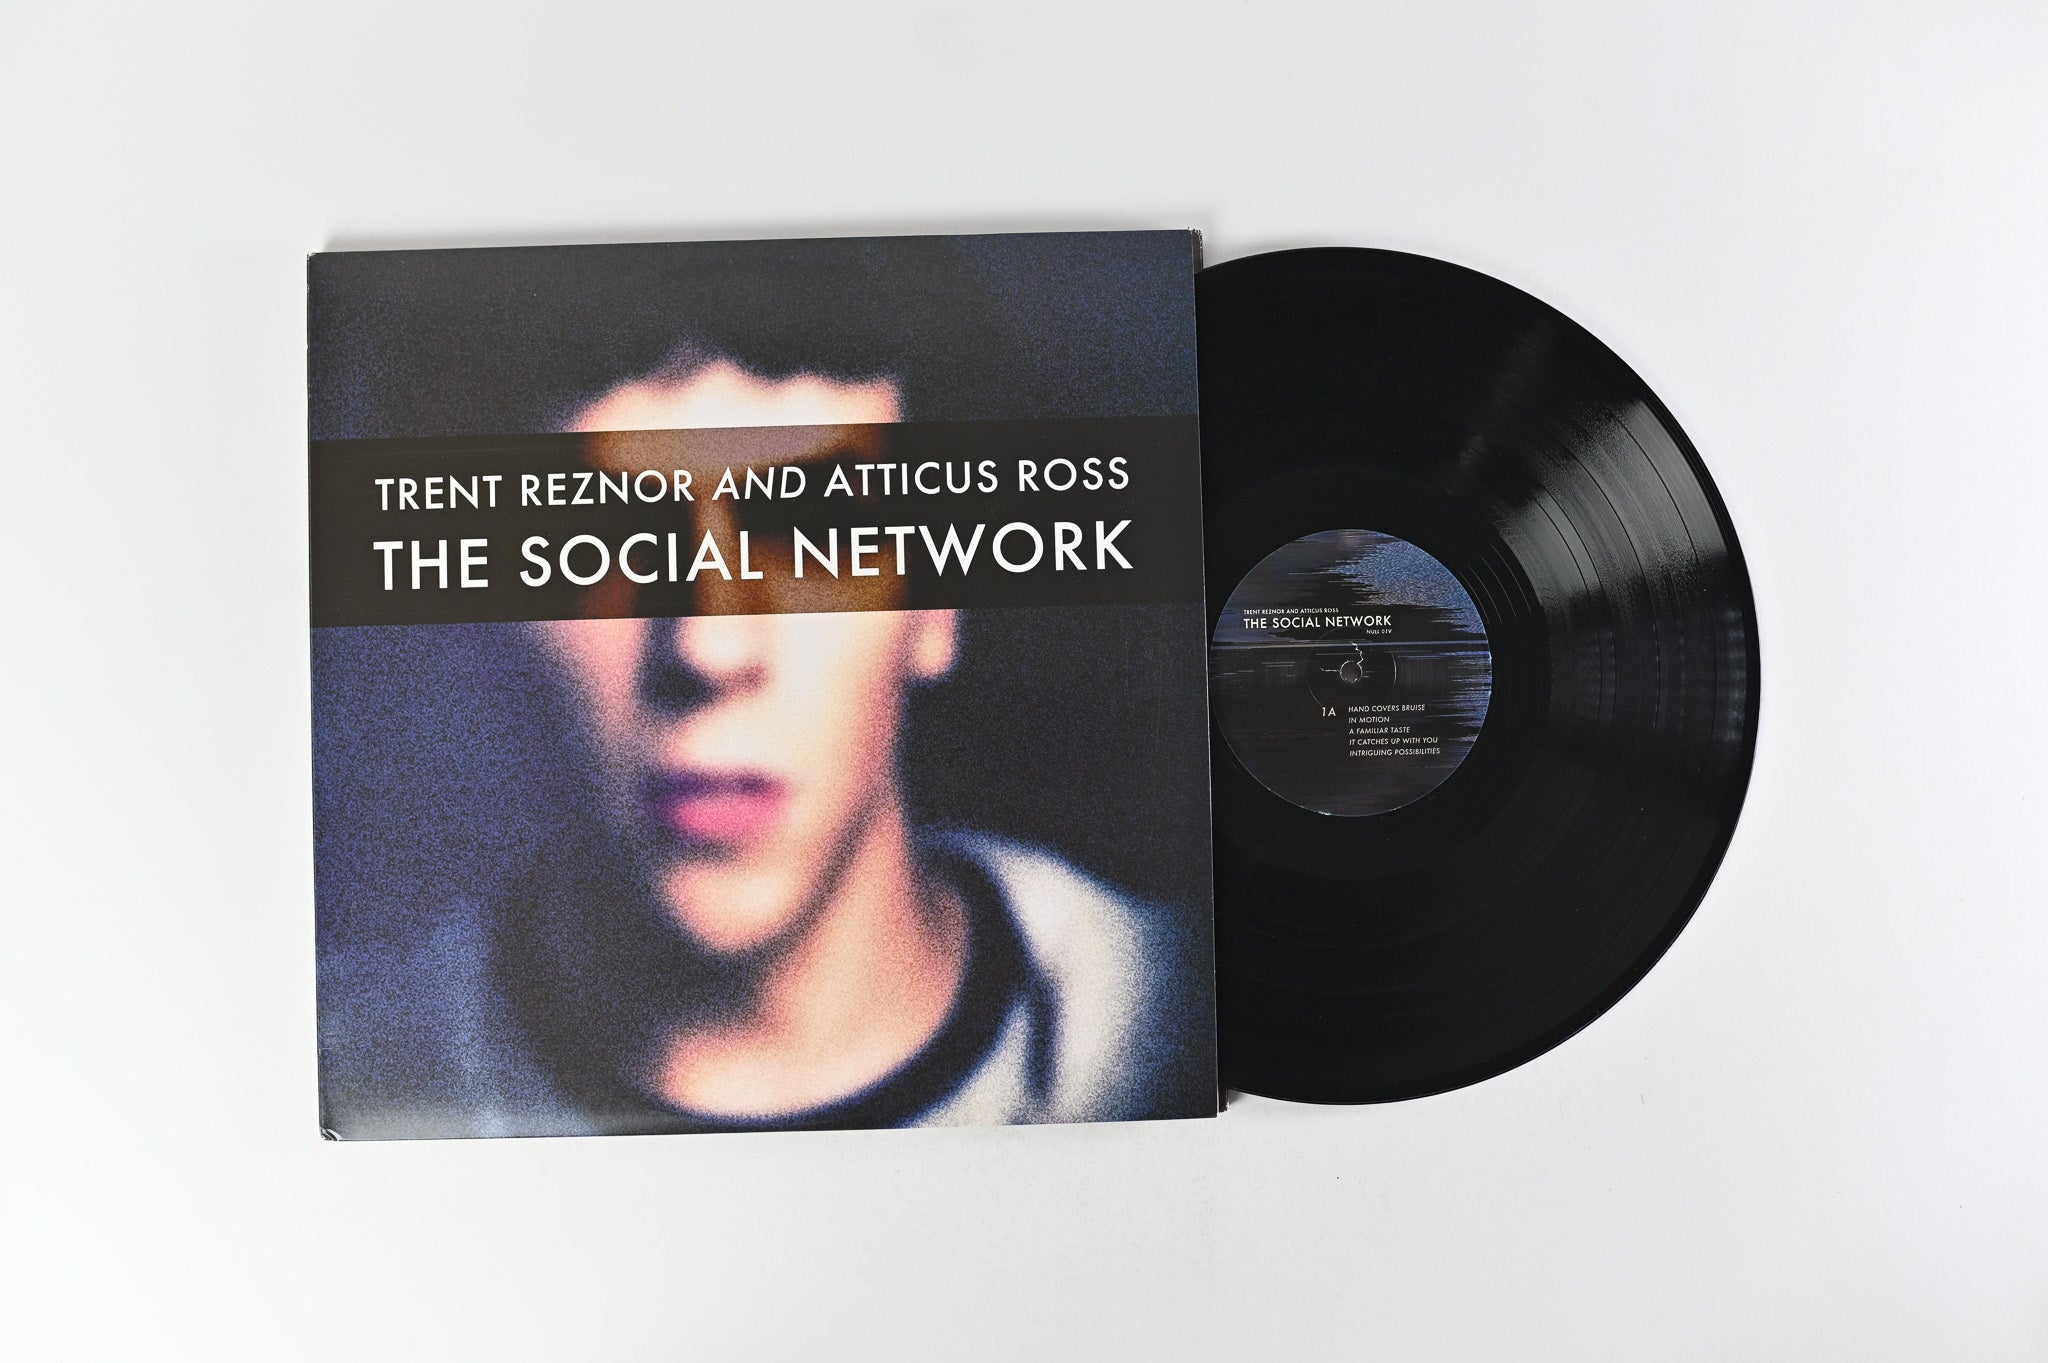 Trent Reznor And Atticus Ross - The Social Network on The Null Corporation